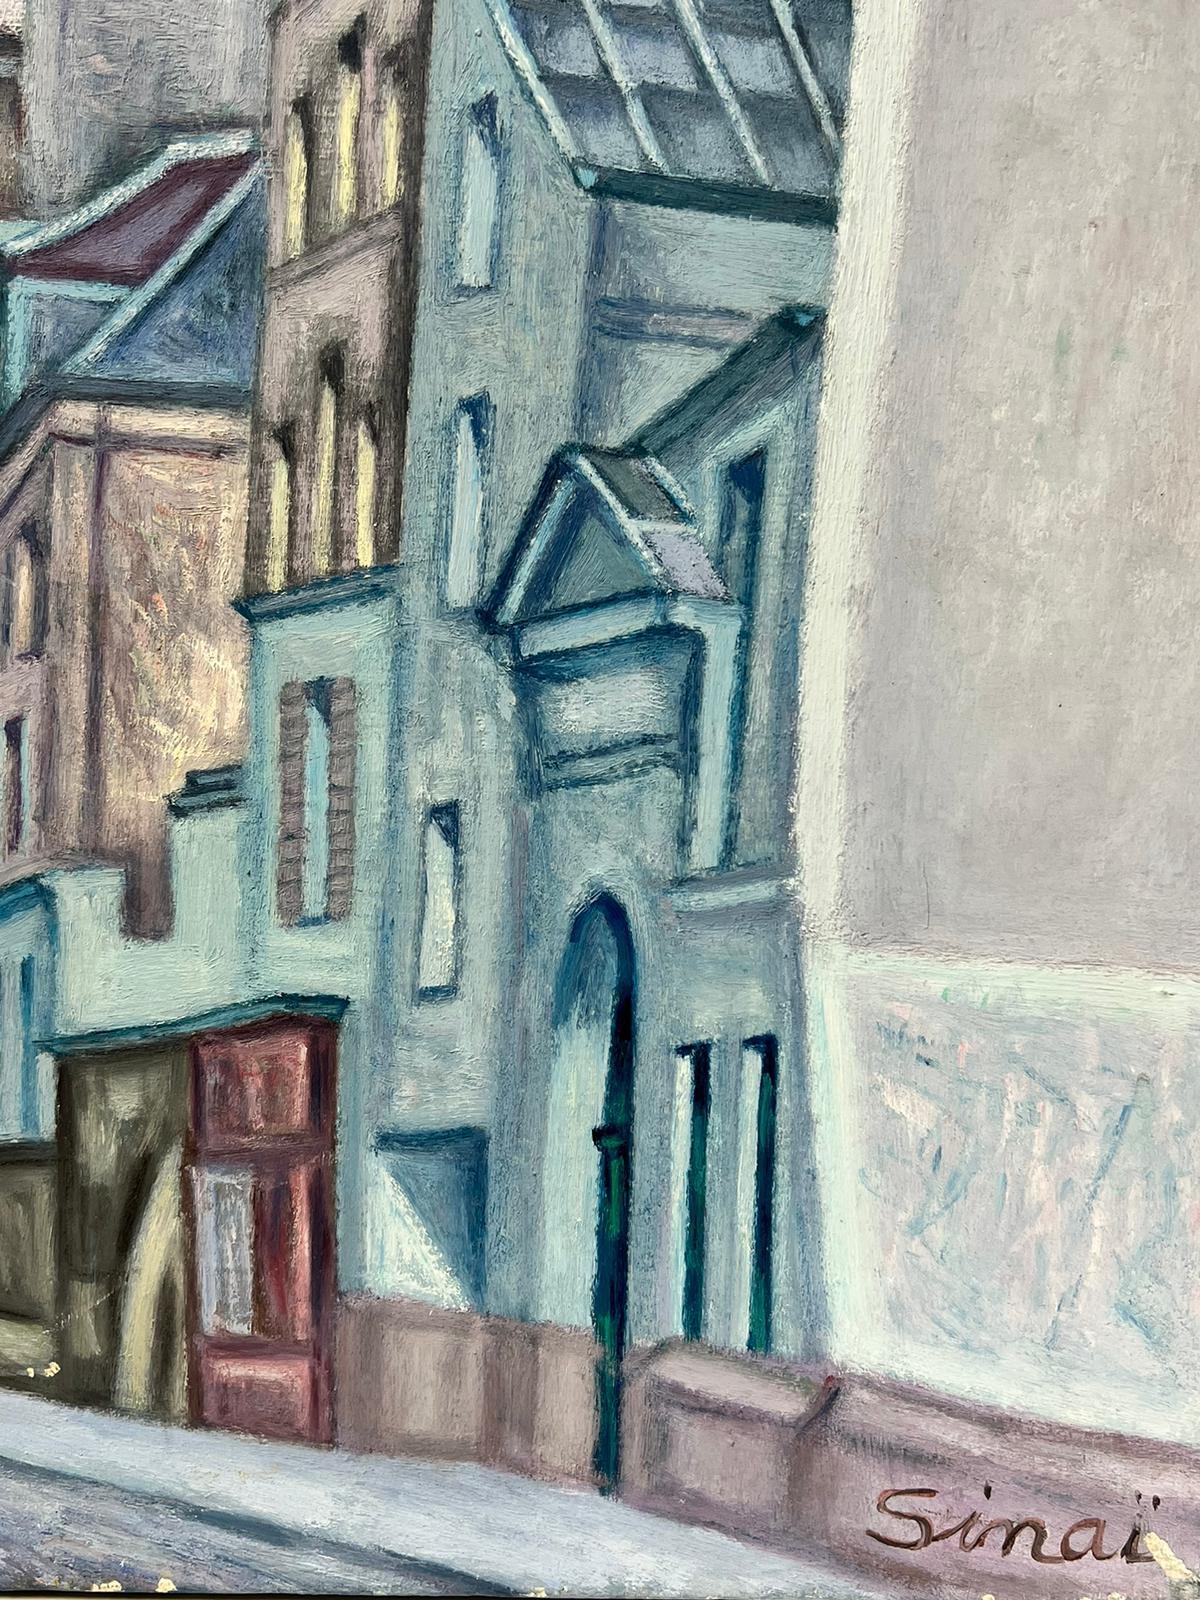 Mid 20th Century French Post-Impressionist Tall Blue Parisian Buildings - Painting by French School